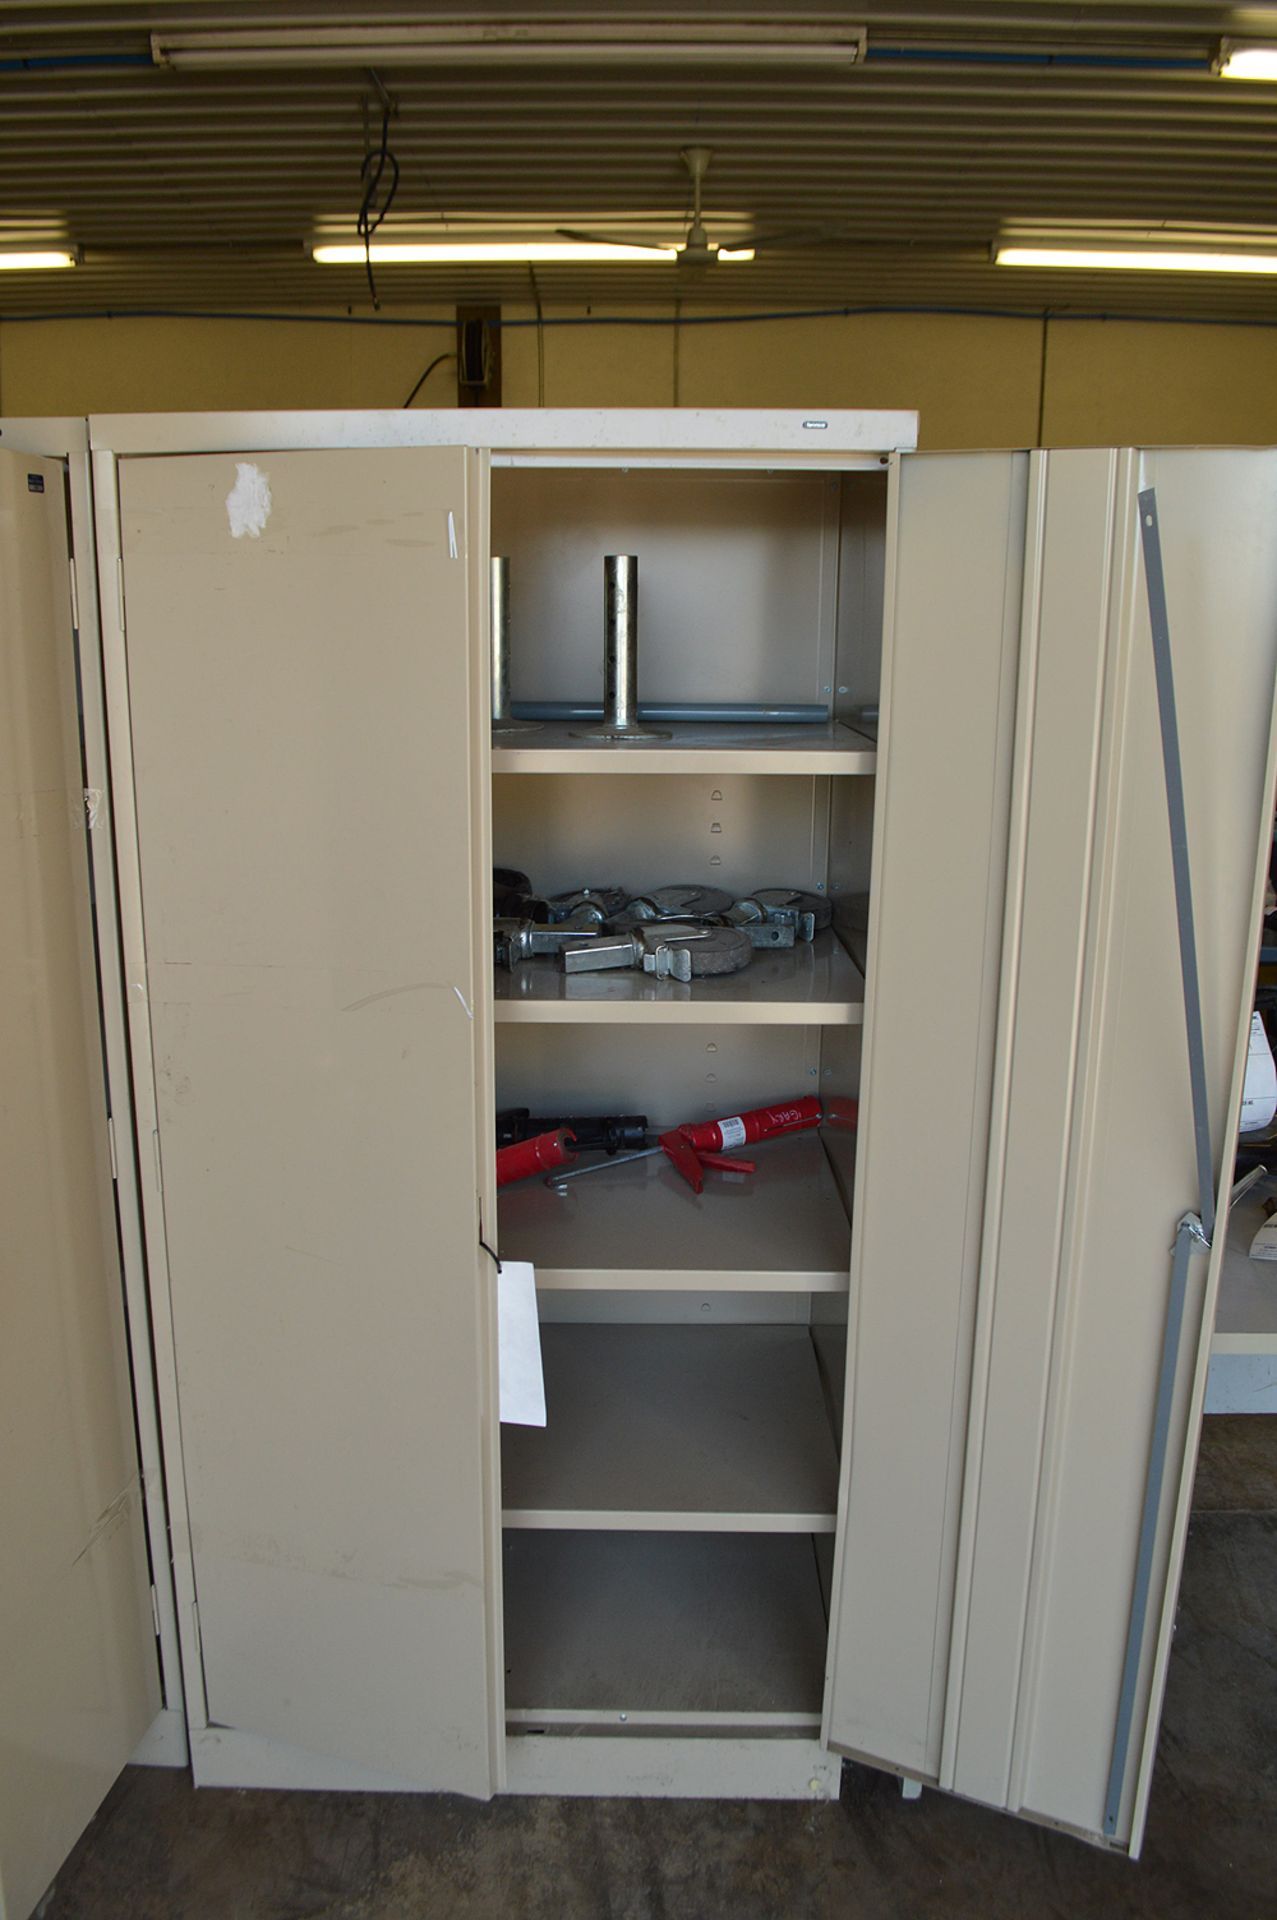 2 DOOR METAL CABINET 6' TALL W/ SOME CASTERS